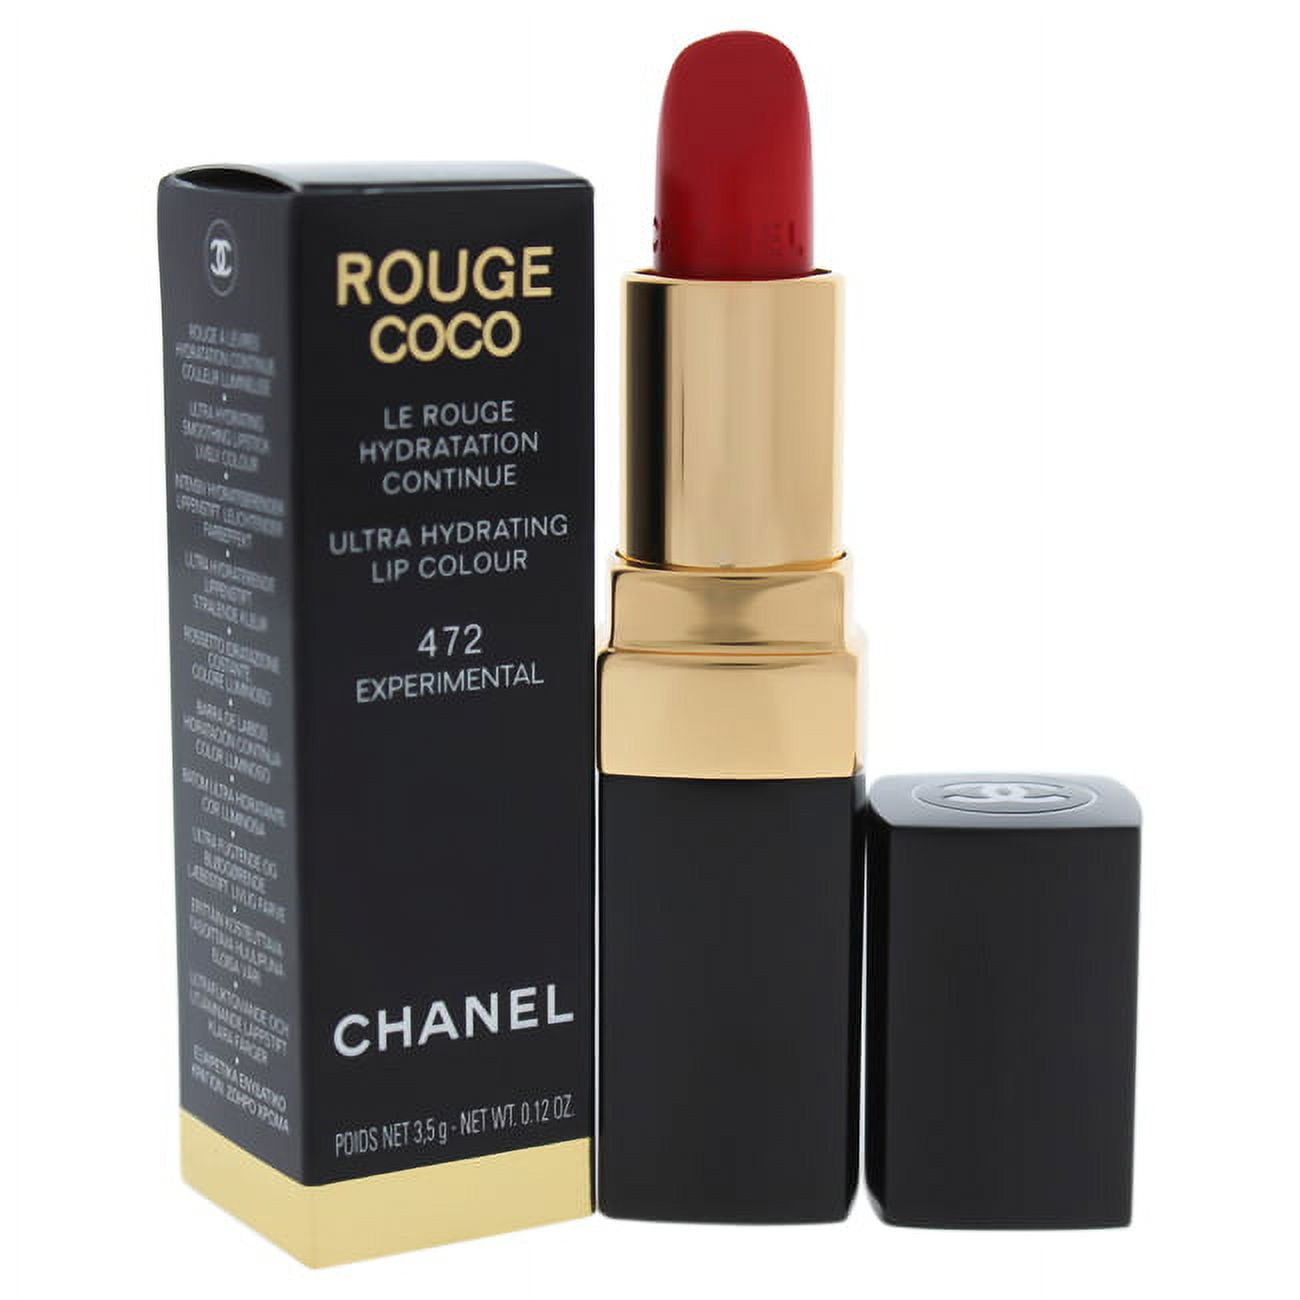 Rouge Coco Ultra Hydrating Lip Colour - 472 Experimental by Chanel for  Women - 0.12 oz Lipstick 